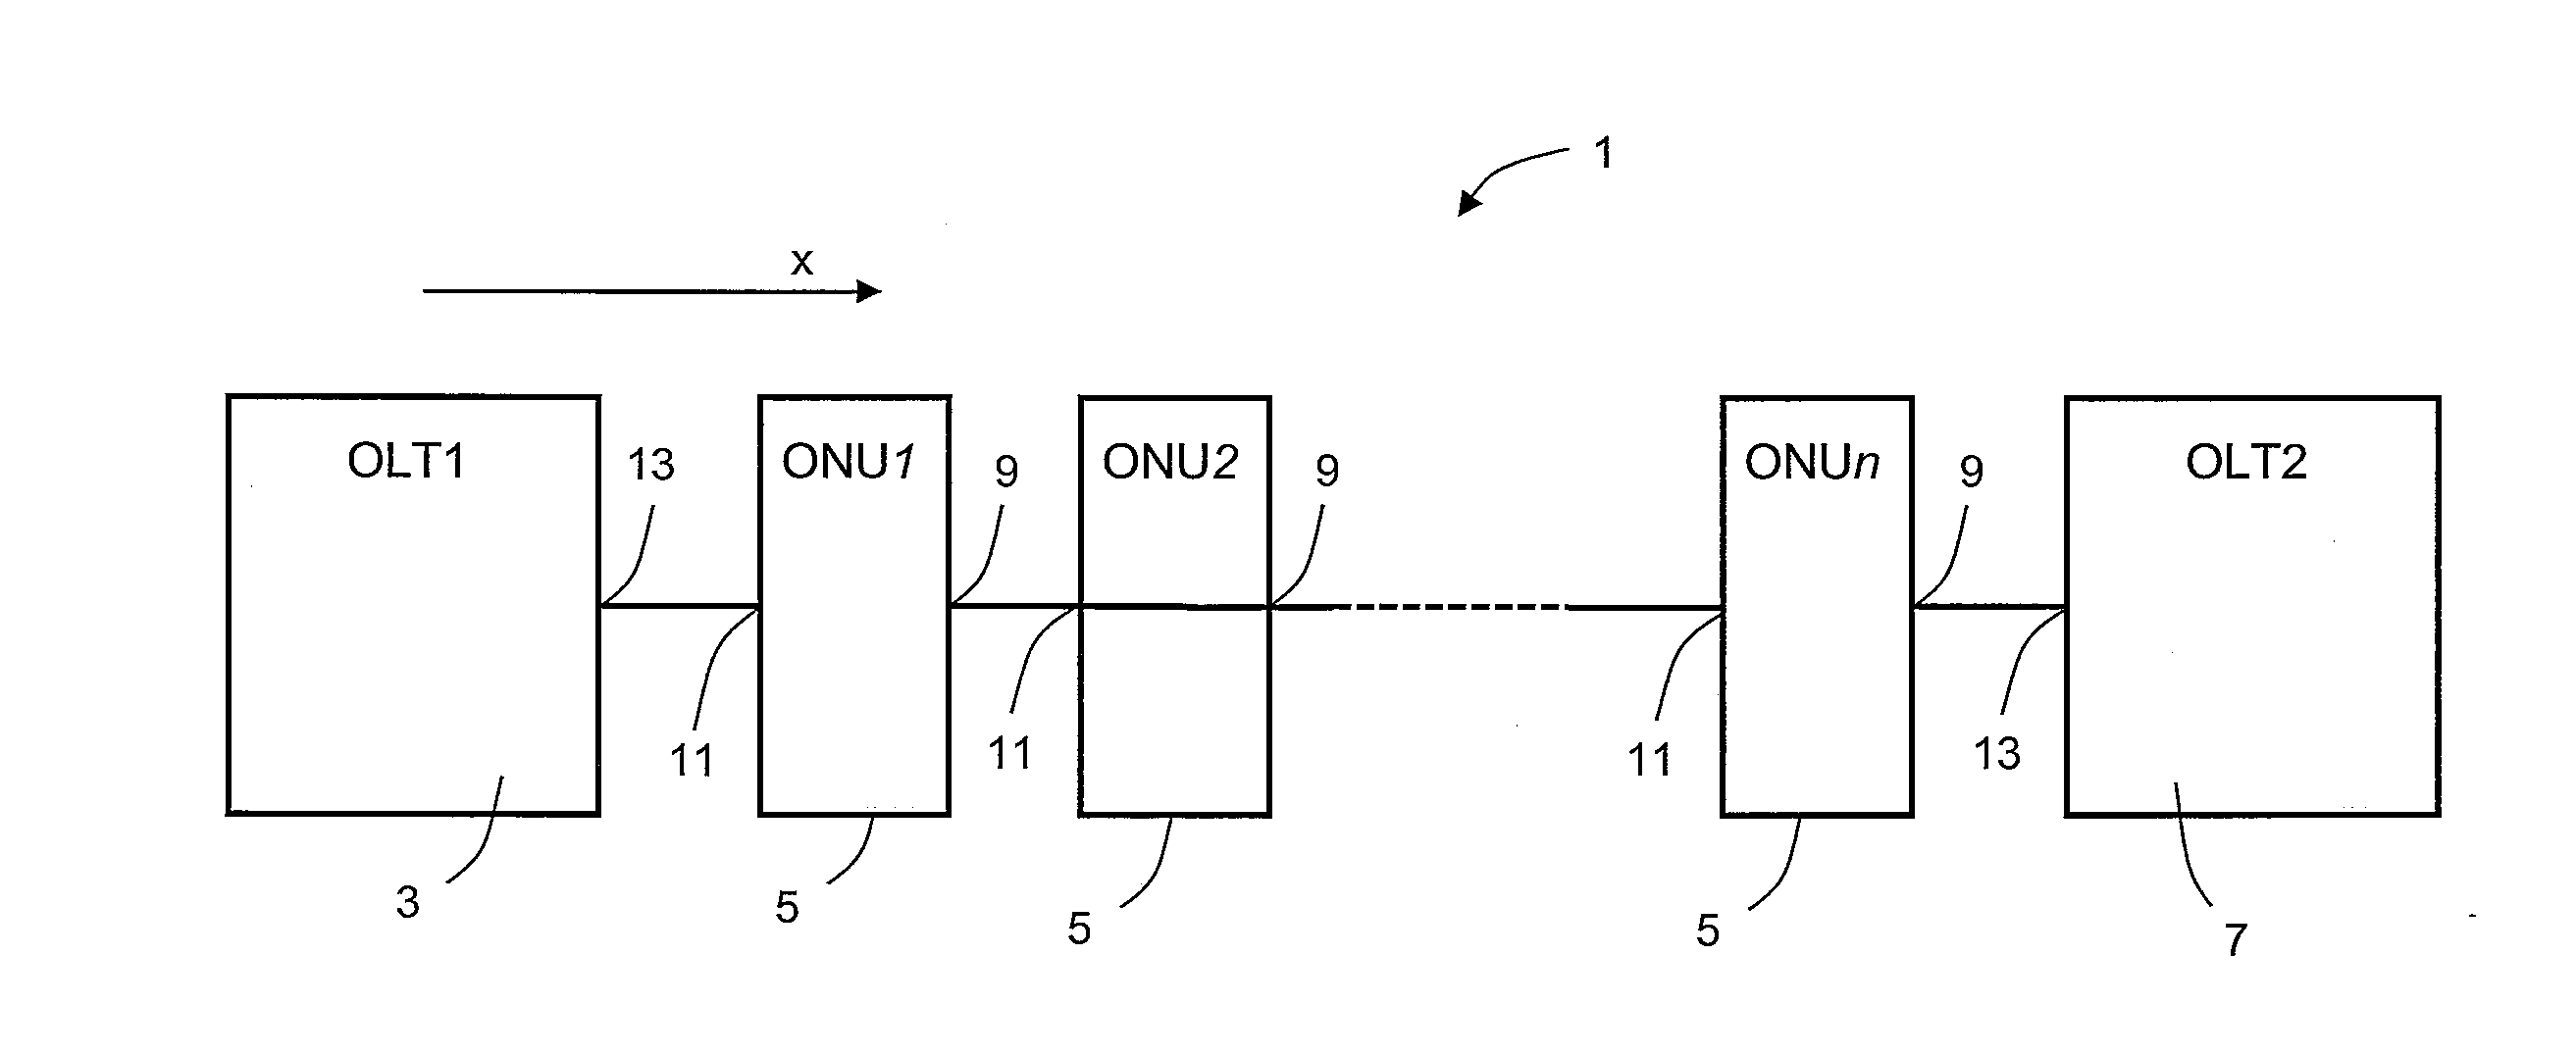 Remote Node and Network Architecture and Data Transmission Method for a Fiber-Optic Network, Especially for Low Bit-Rate Data Transmission